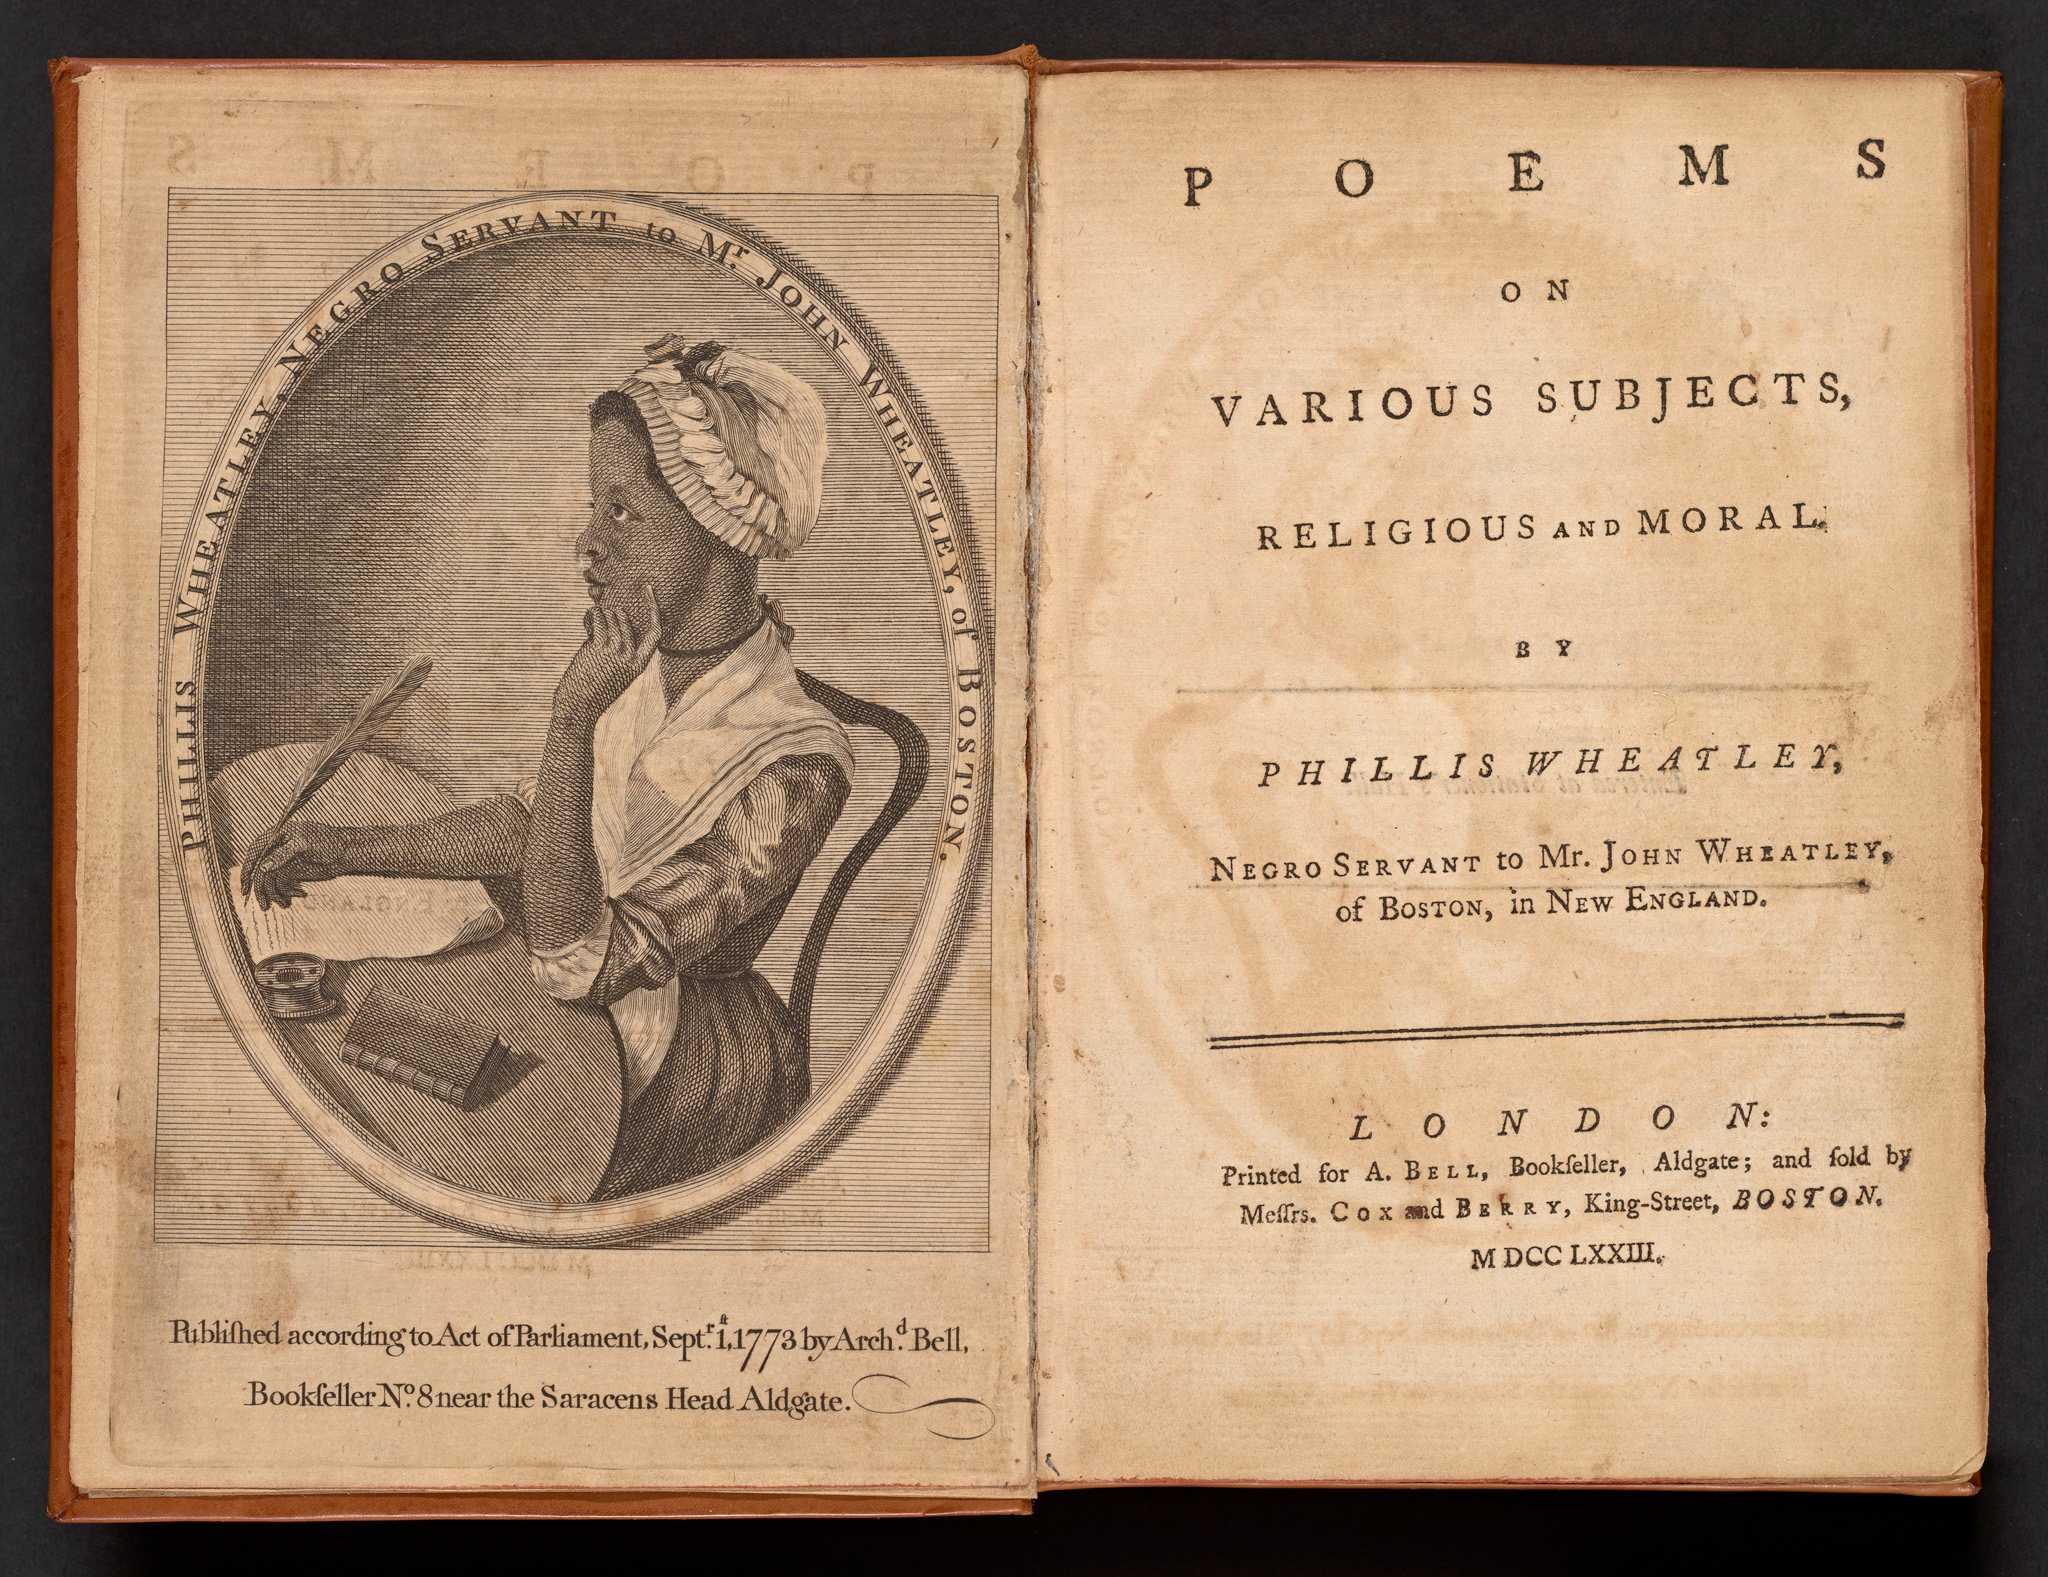 A first edition of the book Poems on Various Subjects, Religious and Moral, by Phillis Wheatley, while she was enslaved to Mr. John Wheatley of Boston. The book has a brown leather cover, the original morocco spine label, and a frontispiece featuring a portrait of Wheatley by Scipio Morehead. Along the top of the portrait are the words [PHILLIS WHEATLEY, NEGRO SERVANT TO MR. JOHN WHEATLEY OF BOSTON]. The book also has the armorial bookplate of Daniel P. Griswold, a small circular ticket from the Library of George W. Brinely, as well as a larger one from Henry Weston Sackett.